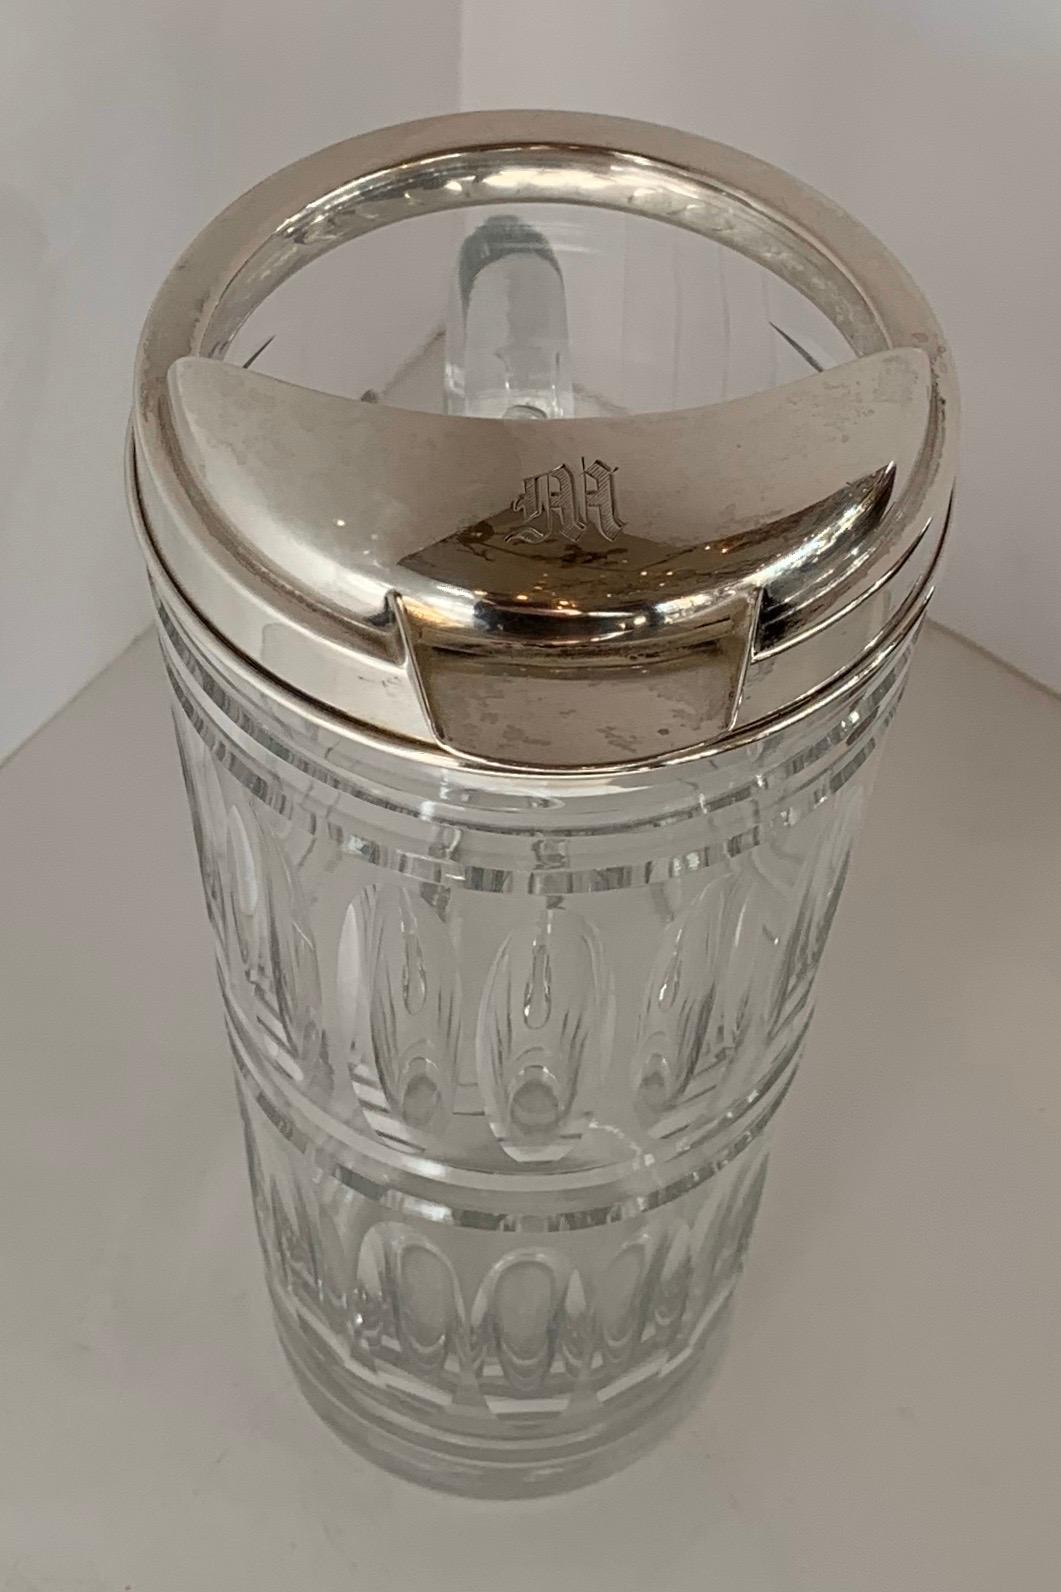 Wonderful Tiffany & Co. Sterling Silver Crystal Cocktail Mixer Pitcher Decanter In Good Condition For Sale In Roslyn, NY